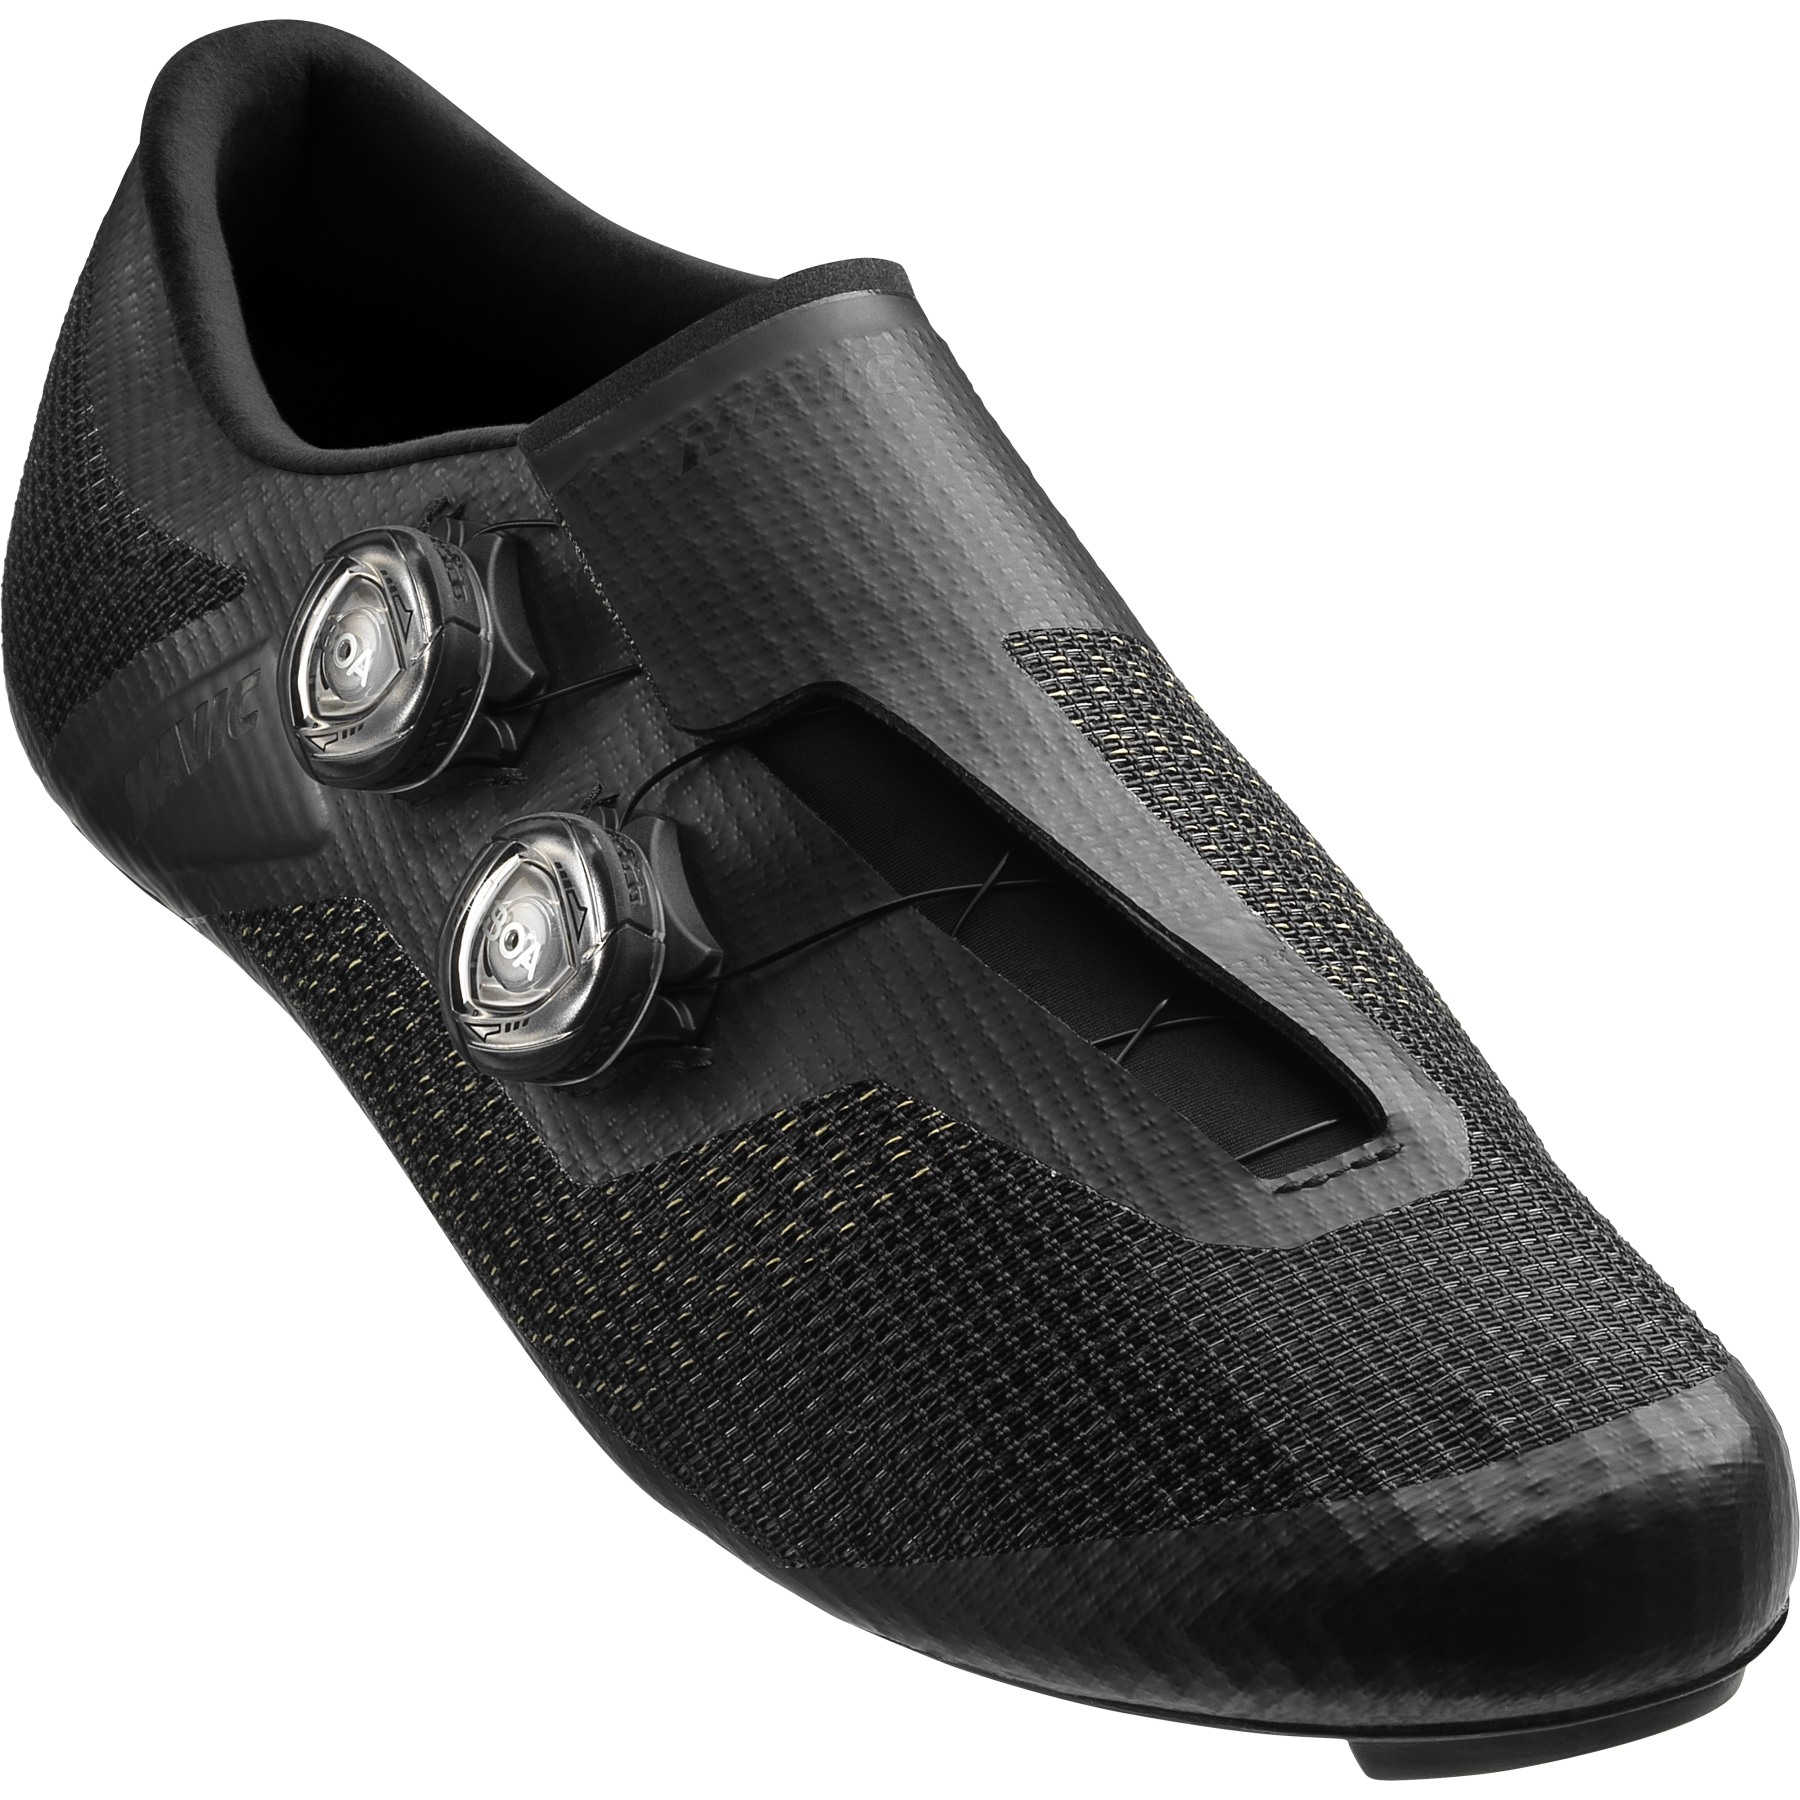 Picture of Mavic Cosmic Ultimate III Cycling Shoes - black/black/black